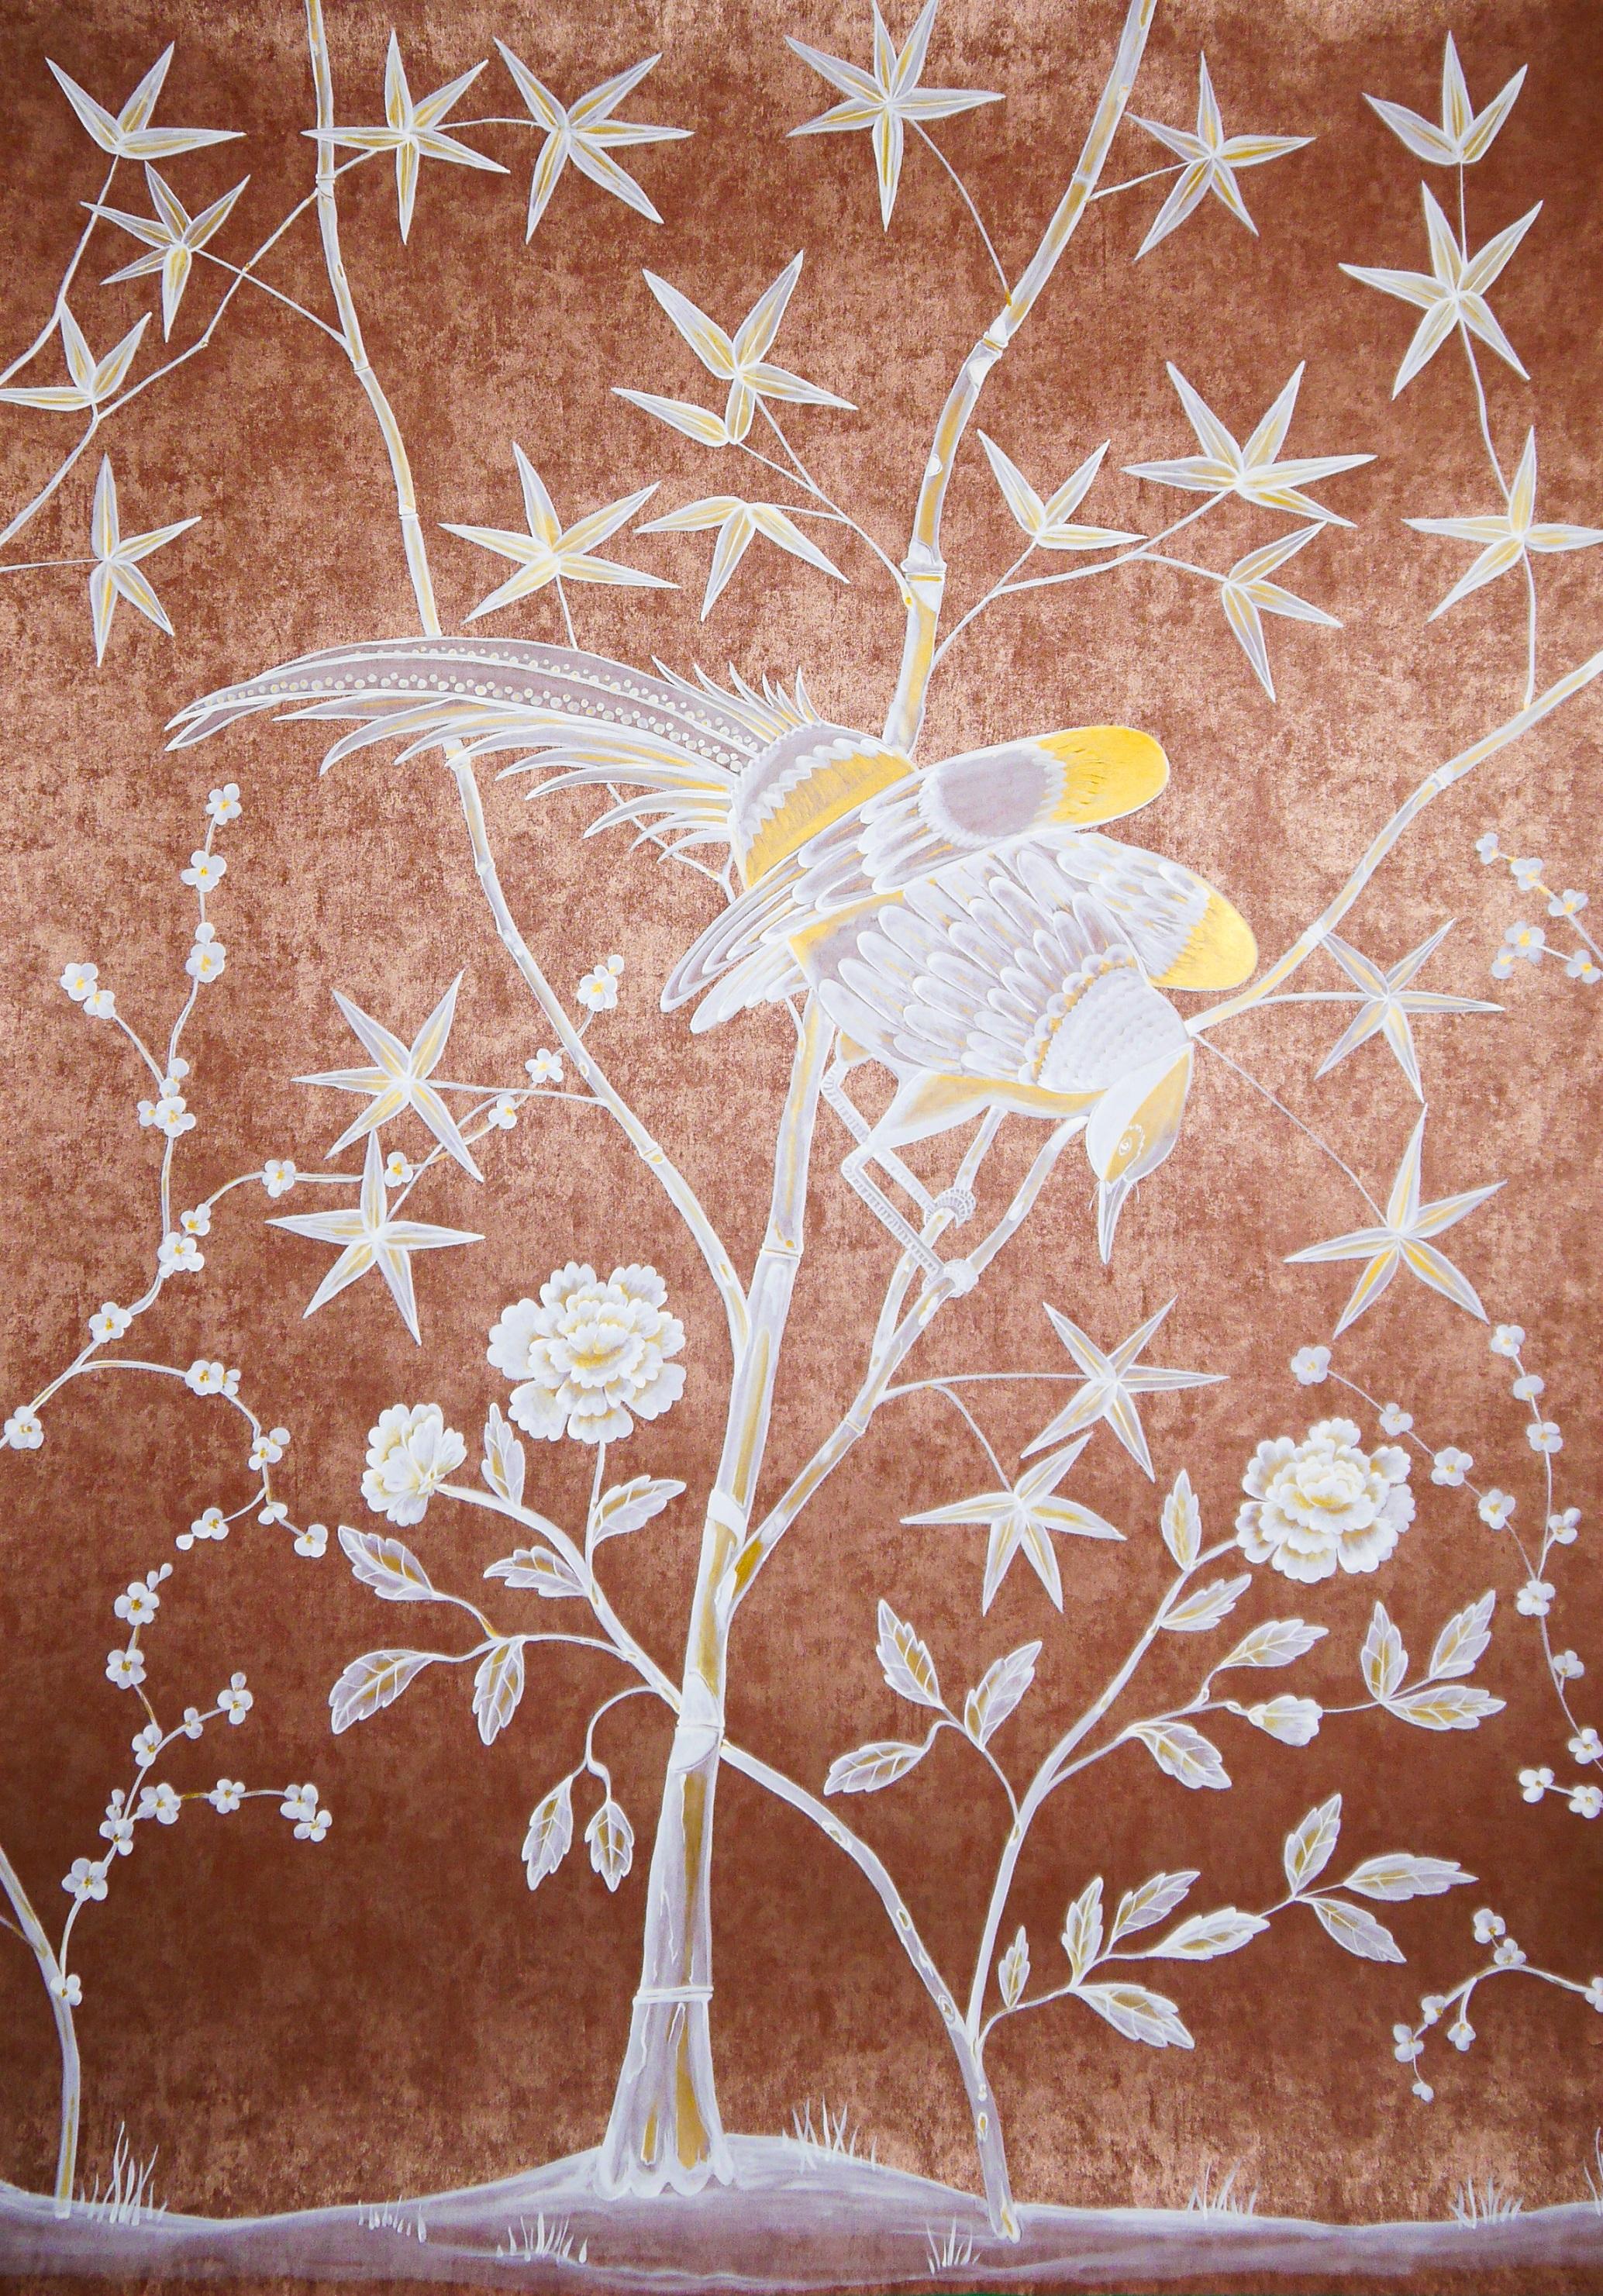 Caledon: exotic birds and bamboo on a red-gold metallic background, inspired by Caledon original. A set of three panels.

A customized order, multiple colours of the background and size are possible.
You can choose to buy a set of 3 panels or 1